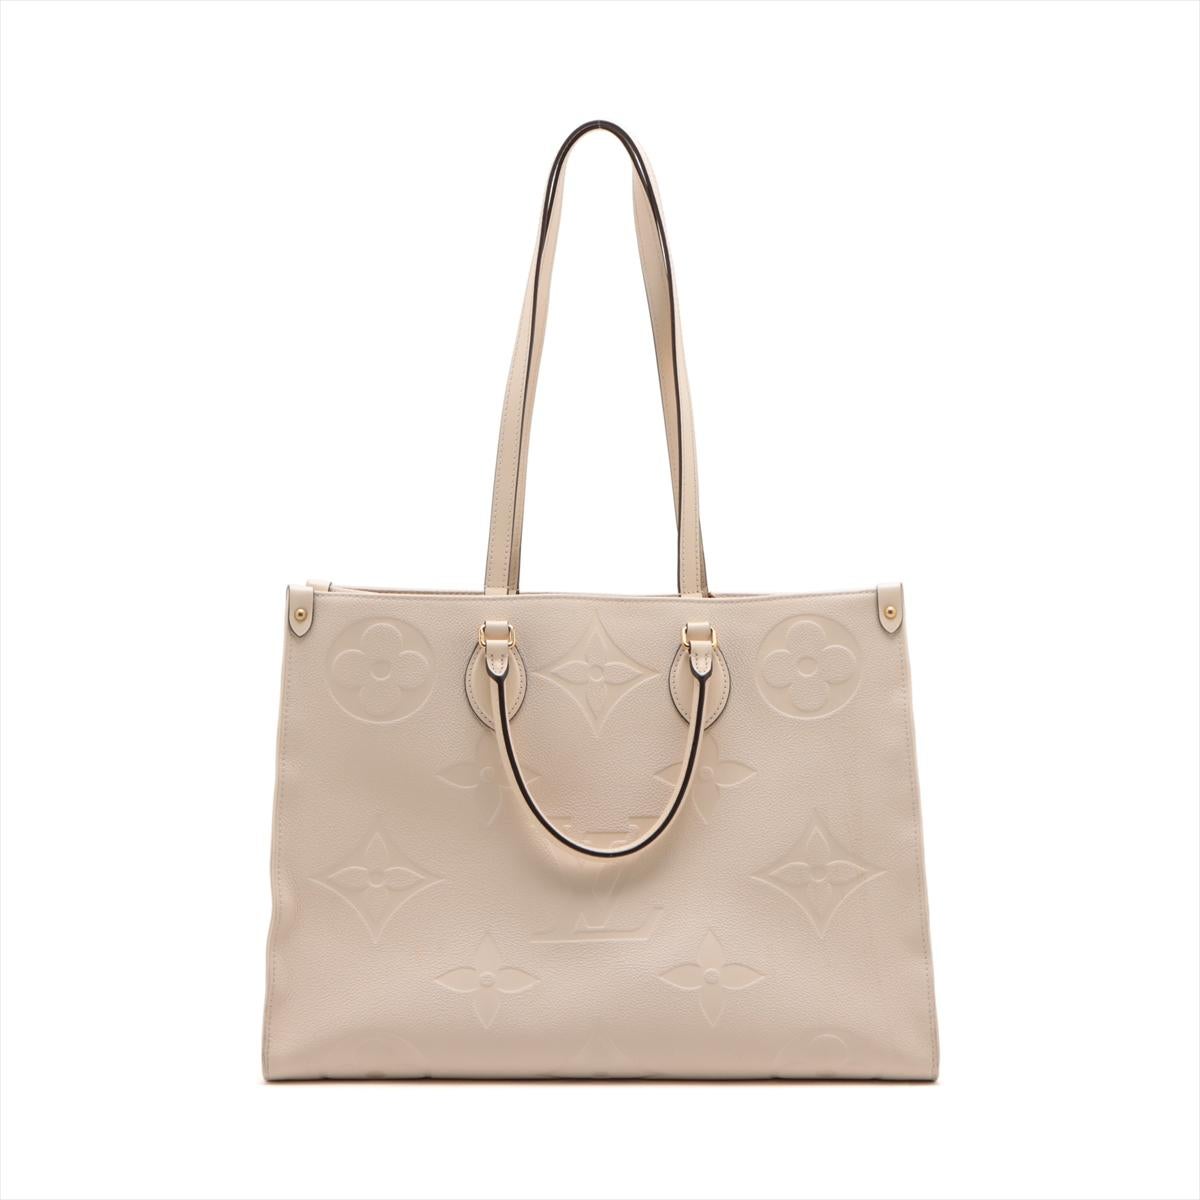 The Louis Vuitton Monogram Empreinte On the Go GM in Crème is a luxurious and sophisticated tote that seamlessly merges style with practicality. Crafted from the iconic Monogram Empreinte leather, the bag features an embossed monogram pattern,